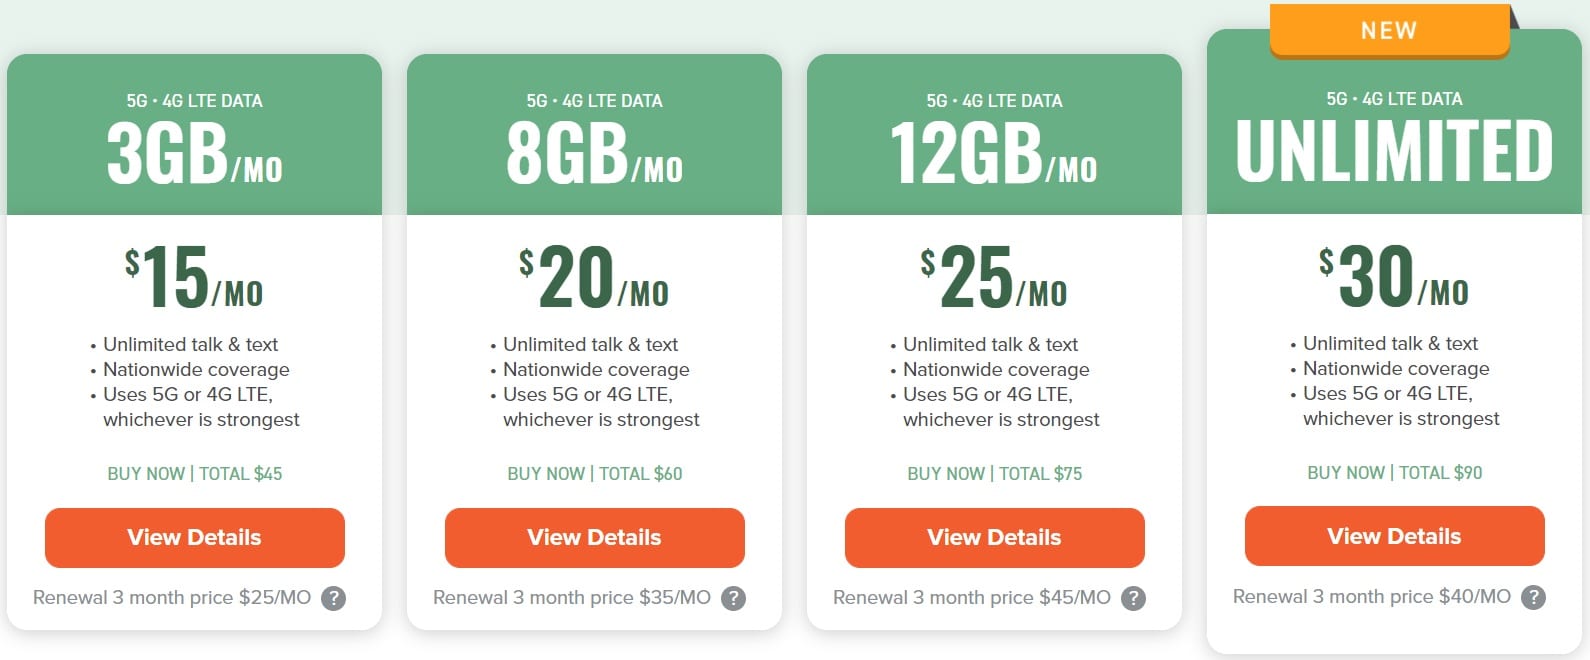 Mint Mobile Annual Unlimited Plan - 3 month pricing